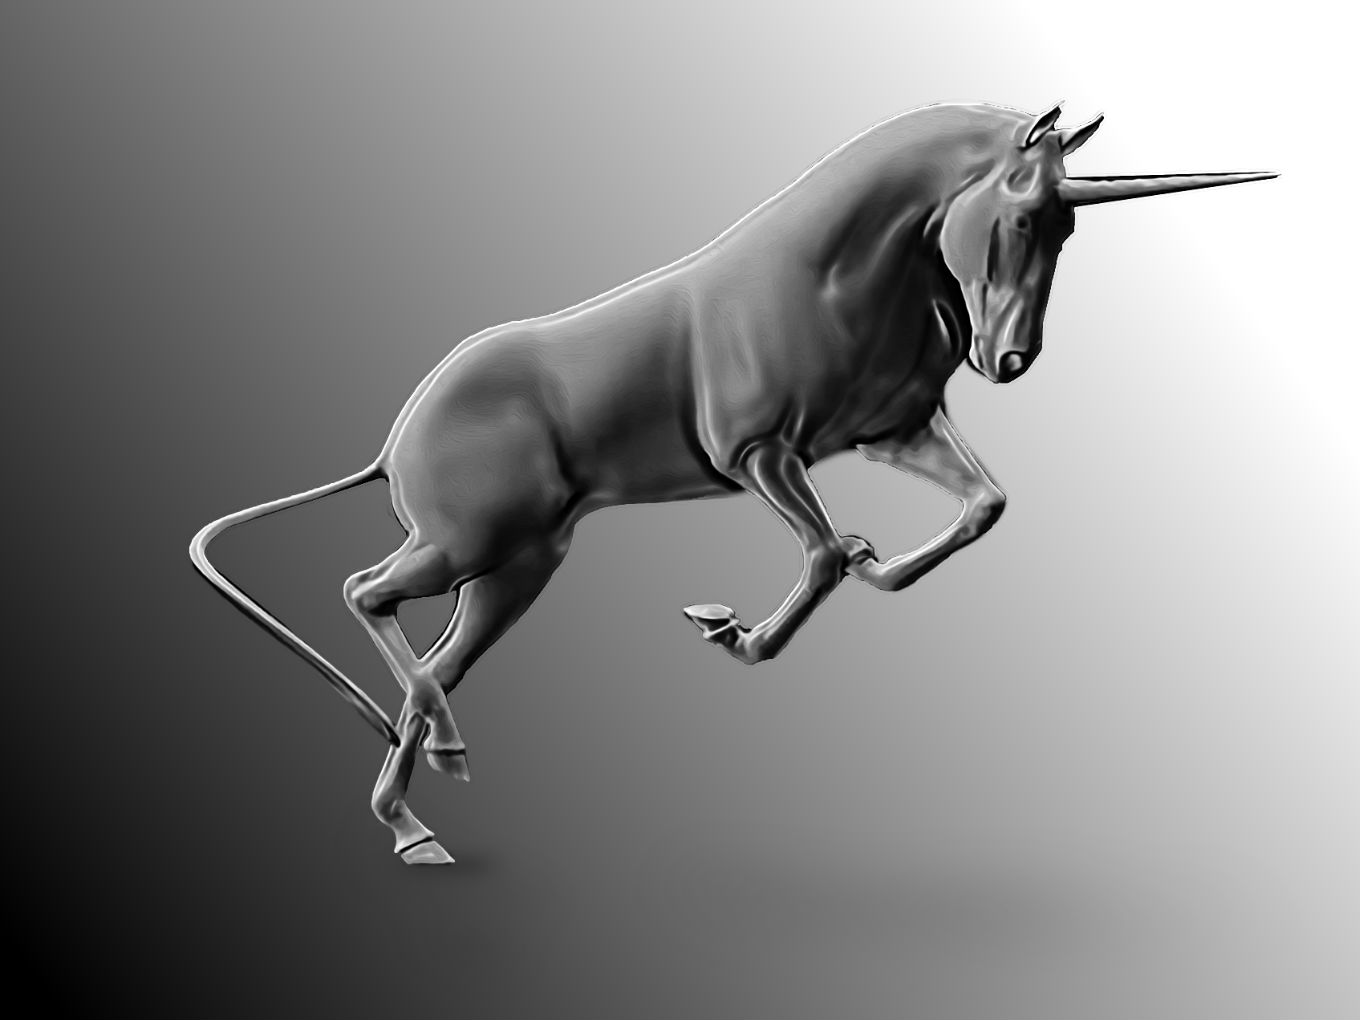 the dawn of zombie unicorns: is a painful future awaits indian startups?